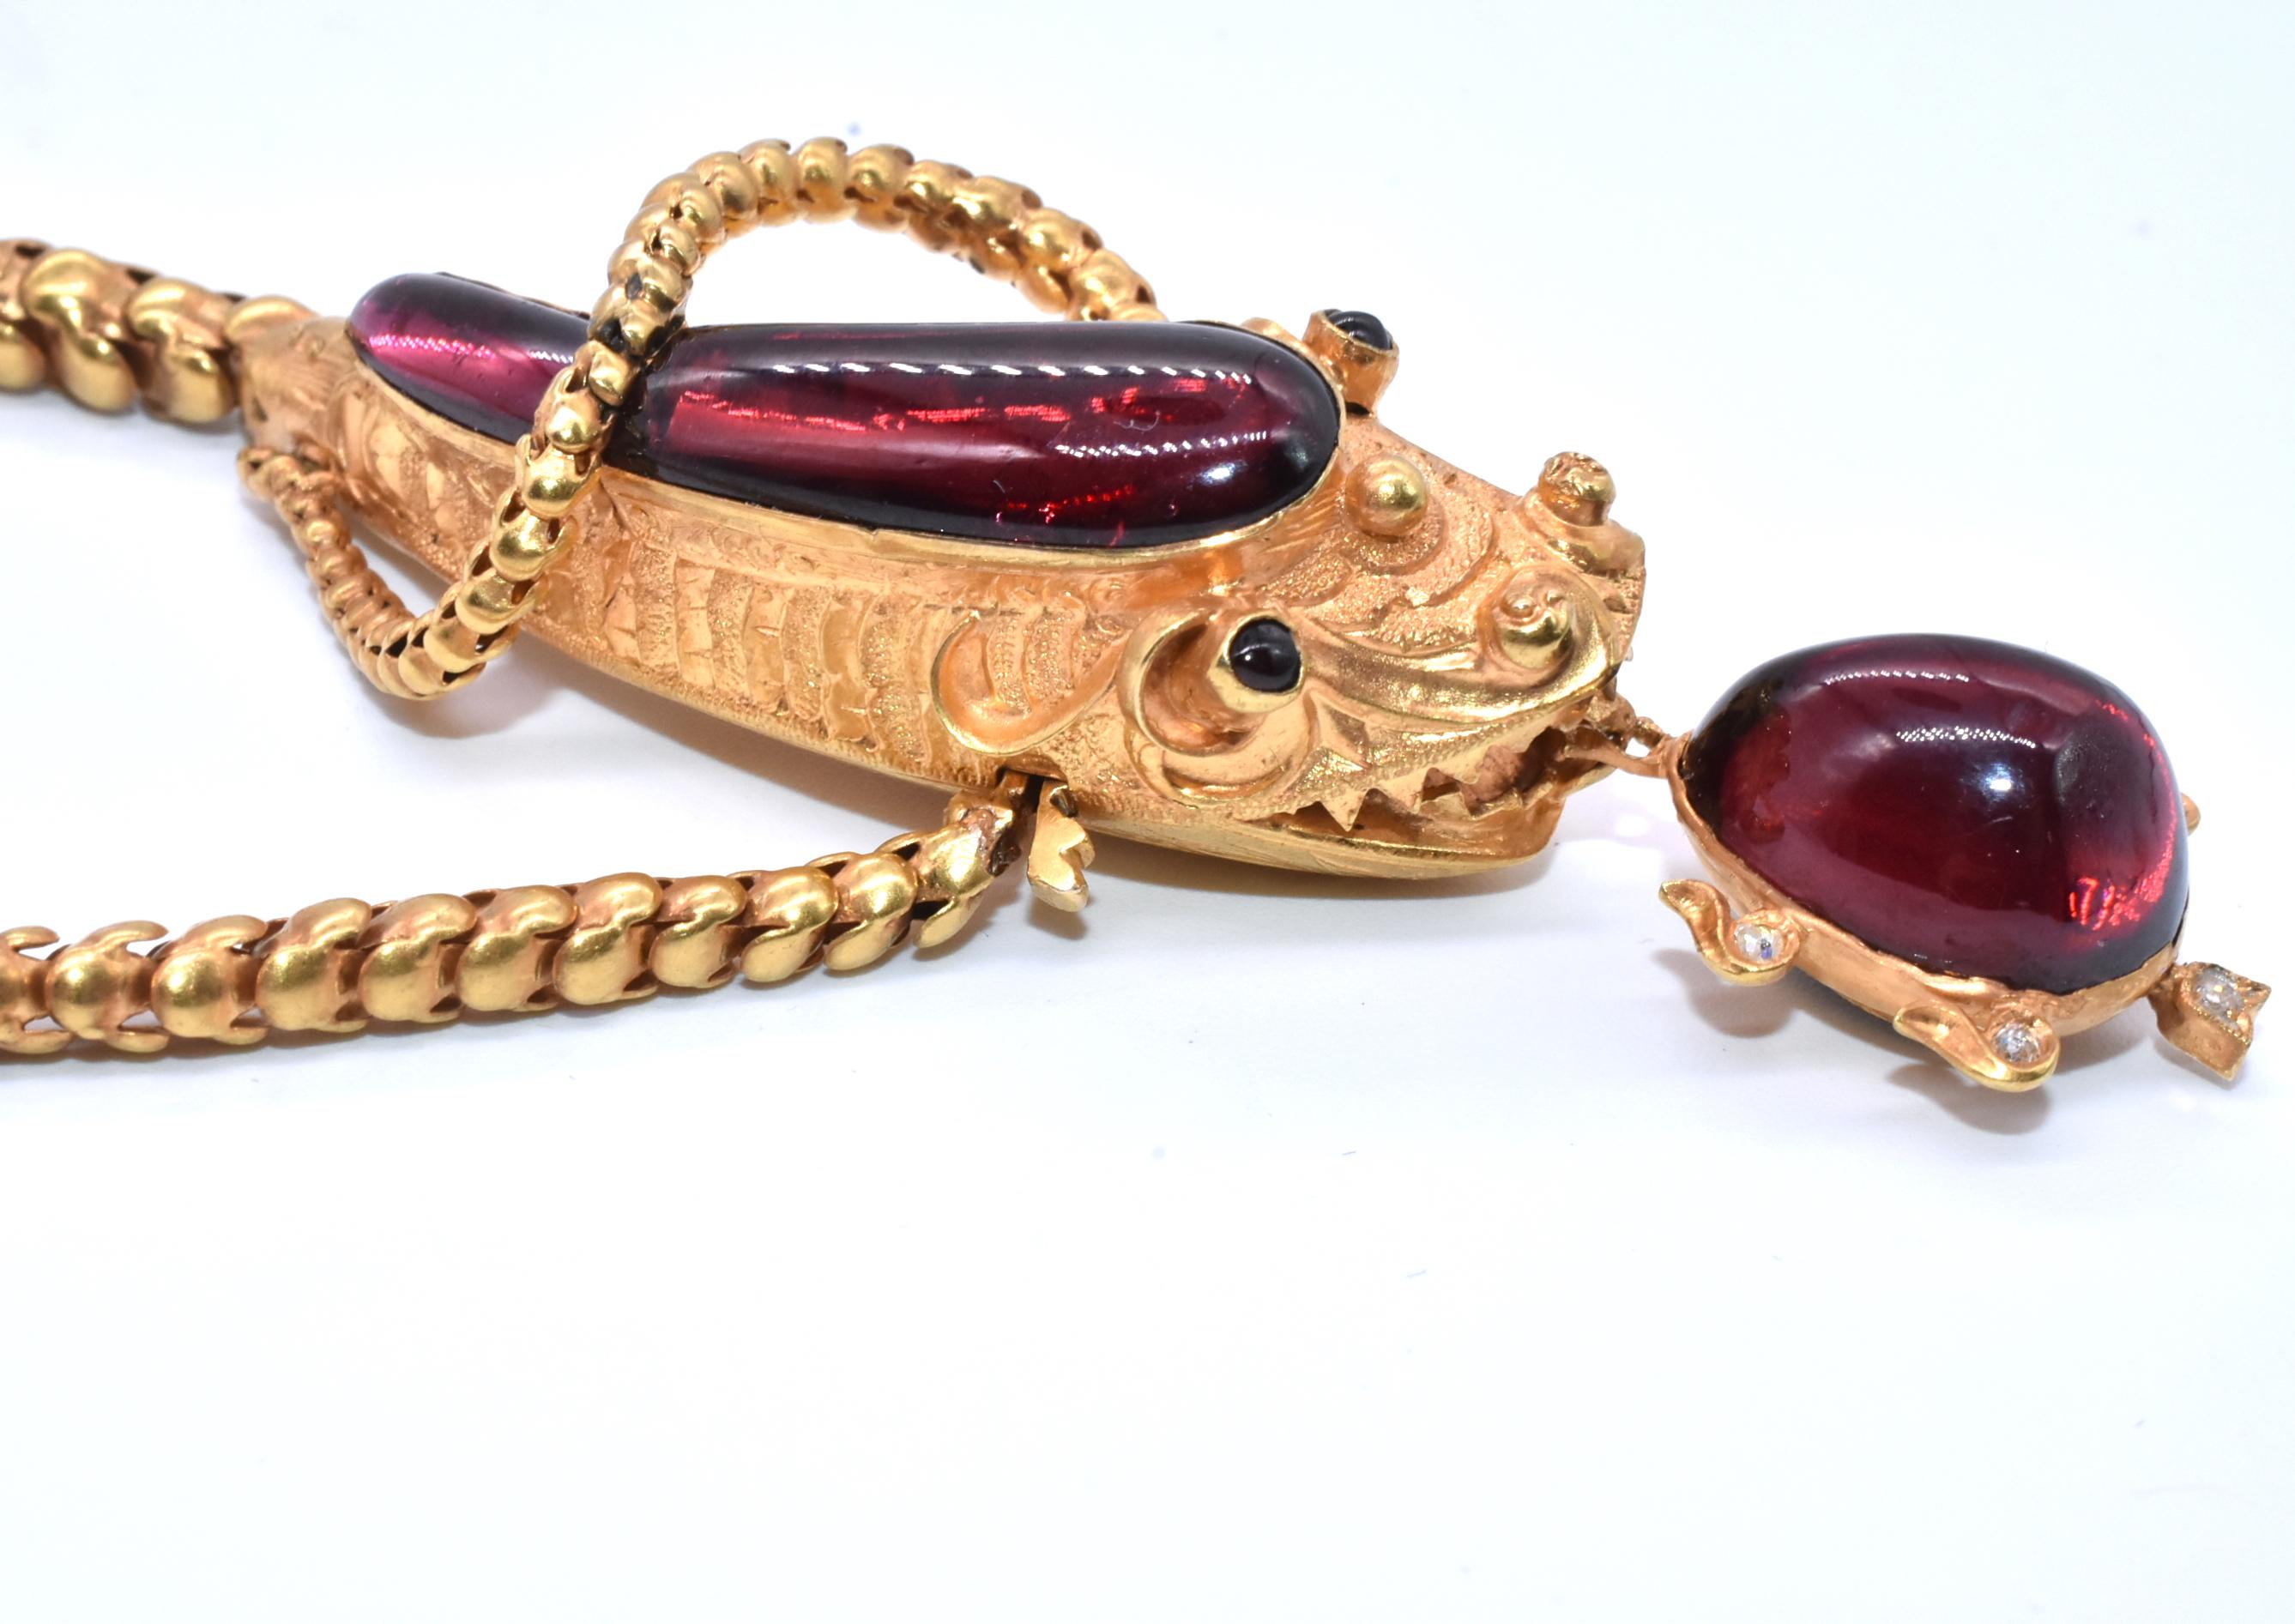 Antique Serpent Biting Turtle Choker with Garnets and Diamonds 8